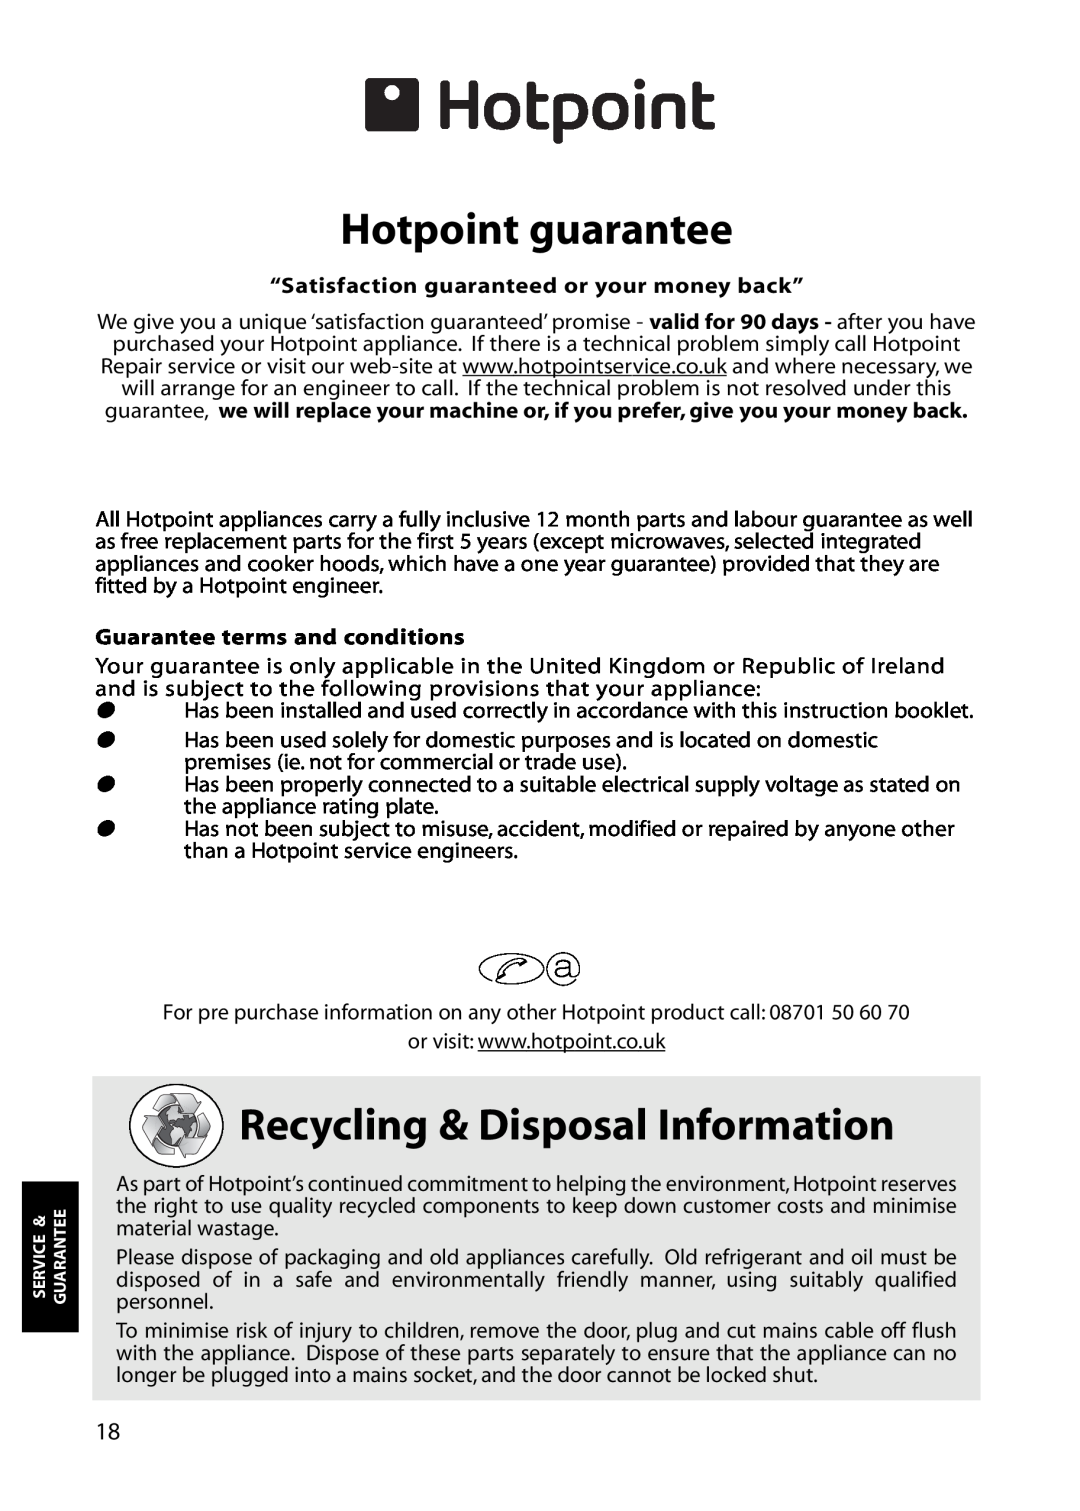 Hotpoint RLA81, RLM81 Hotpoint guarantee, Recycling & Disposal Information, “Satisfaction guaranteed or your money back” 